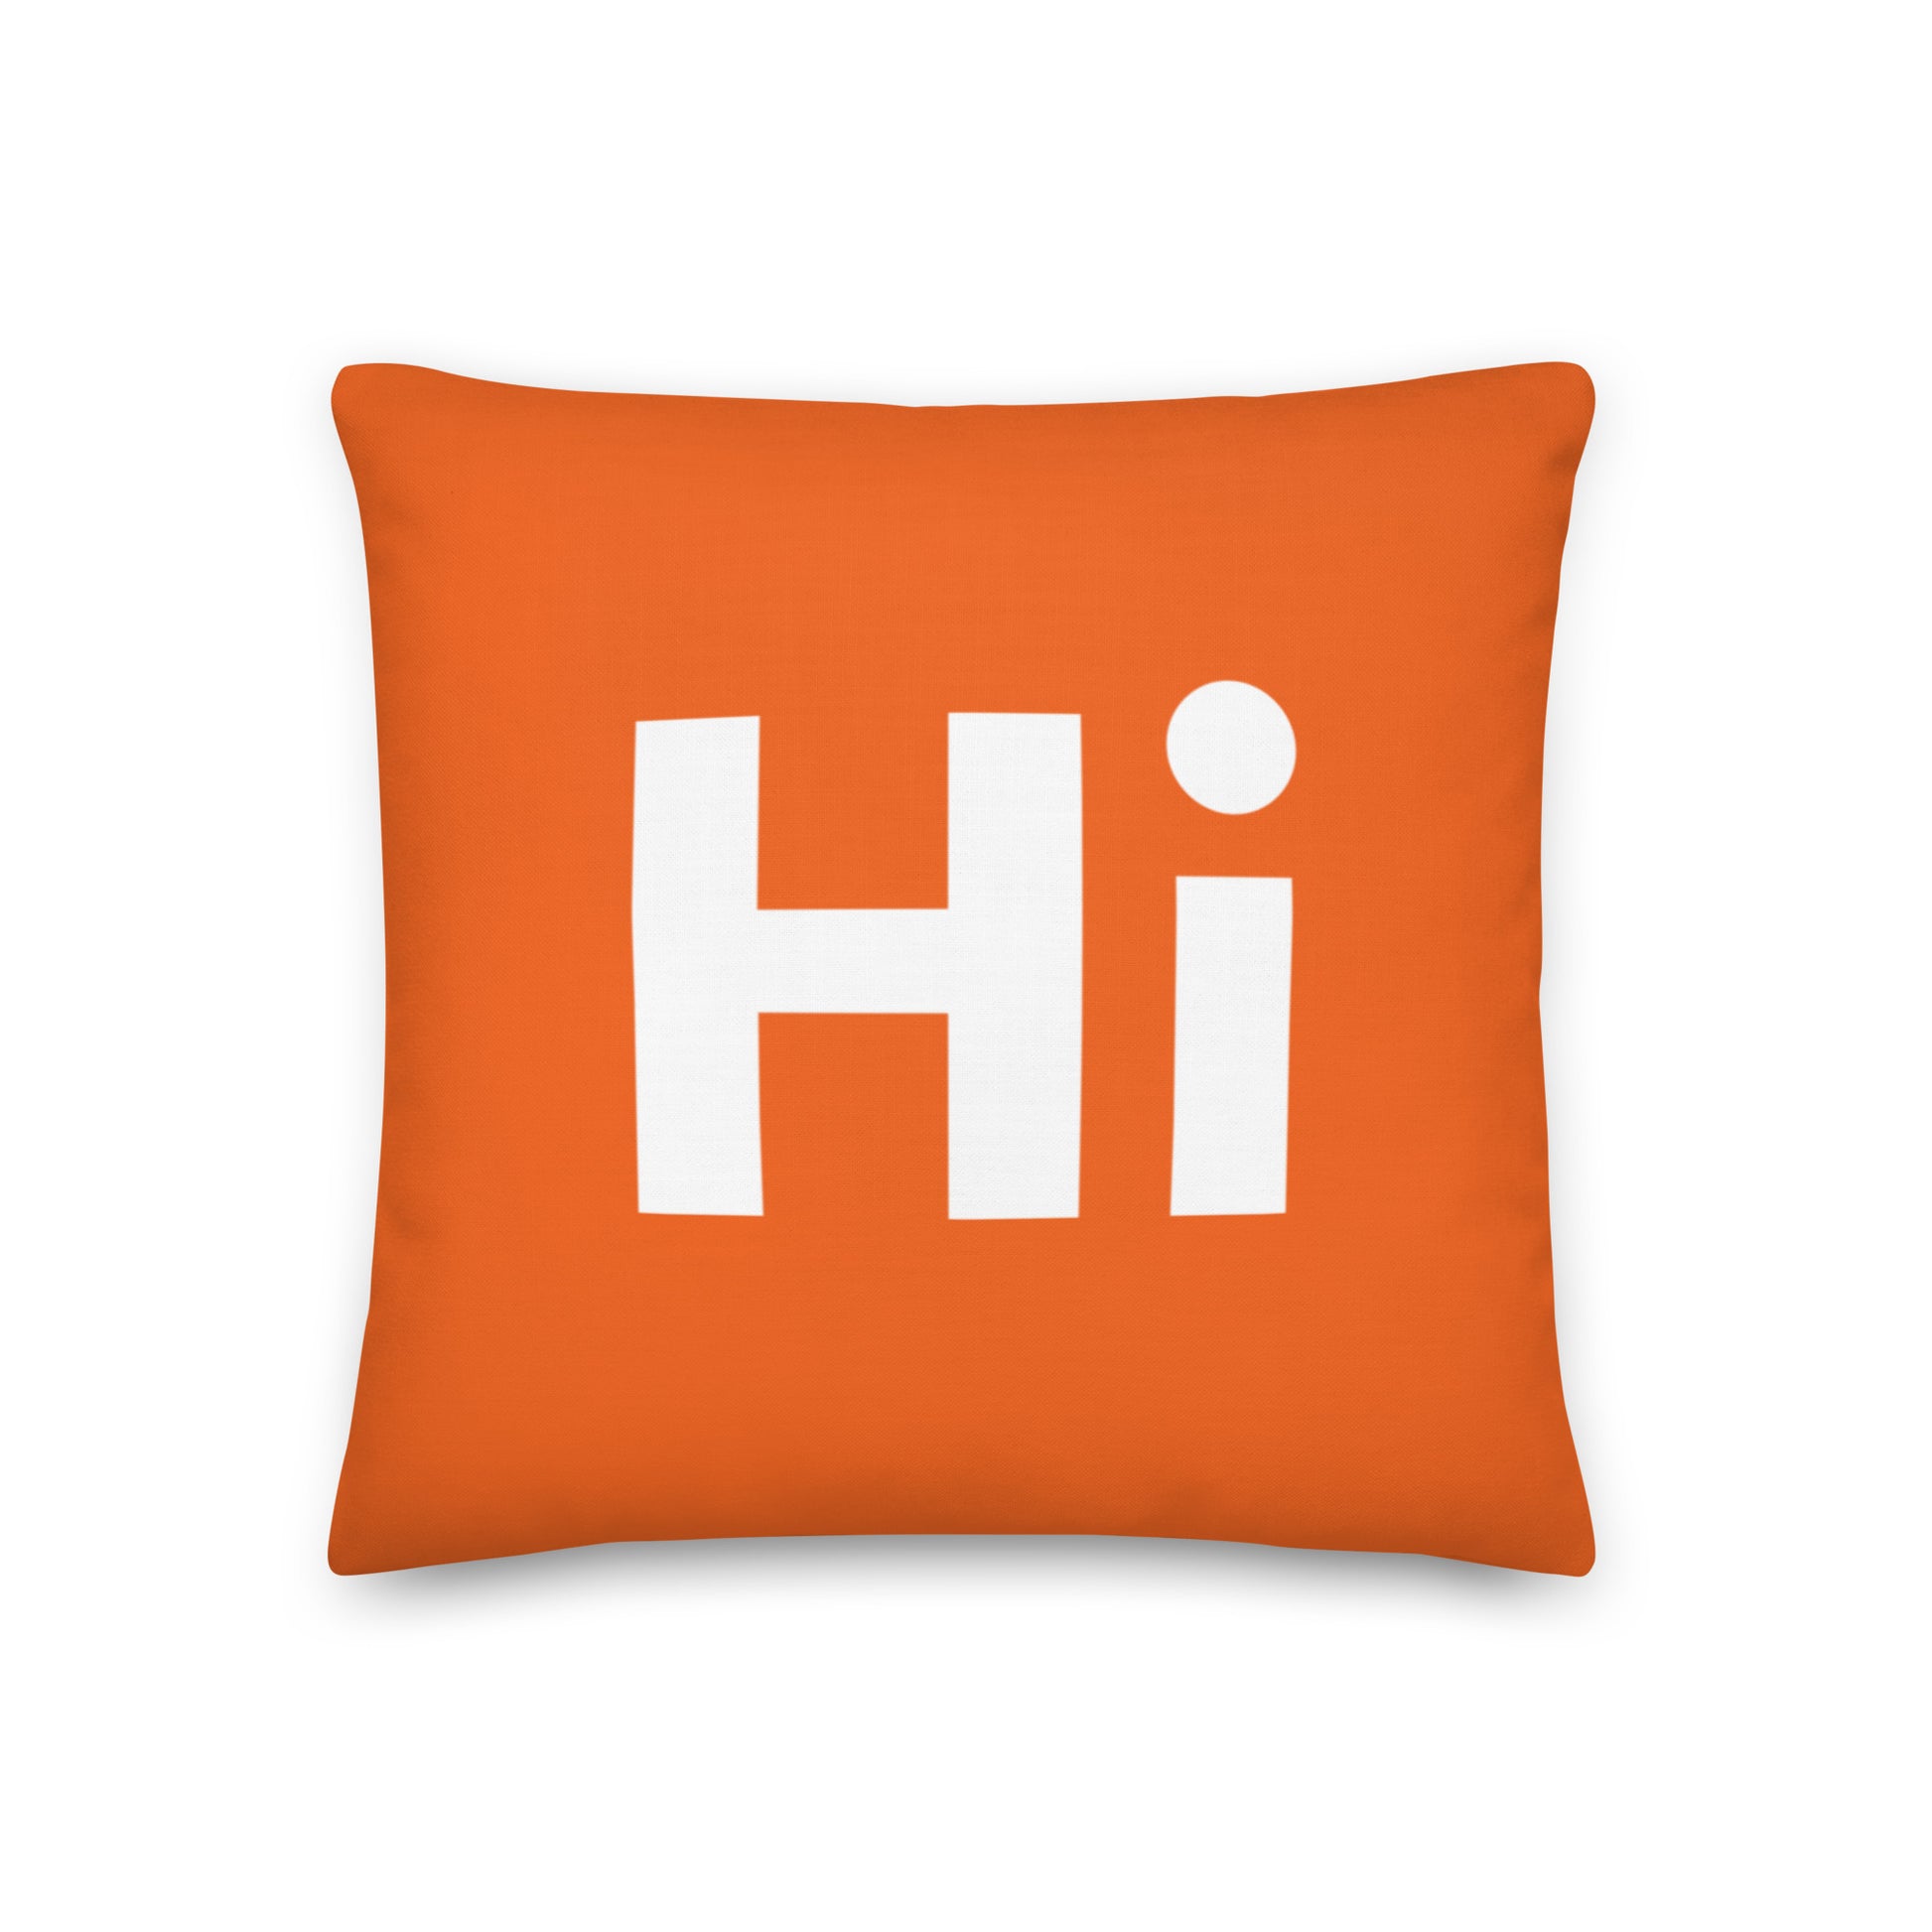 Hi Pillow in orange by HiJohnny.com